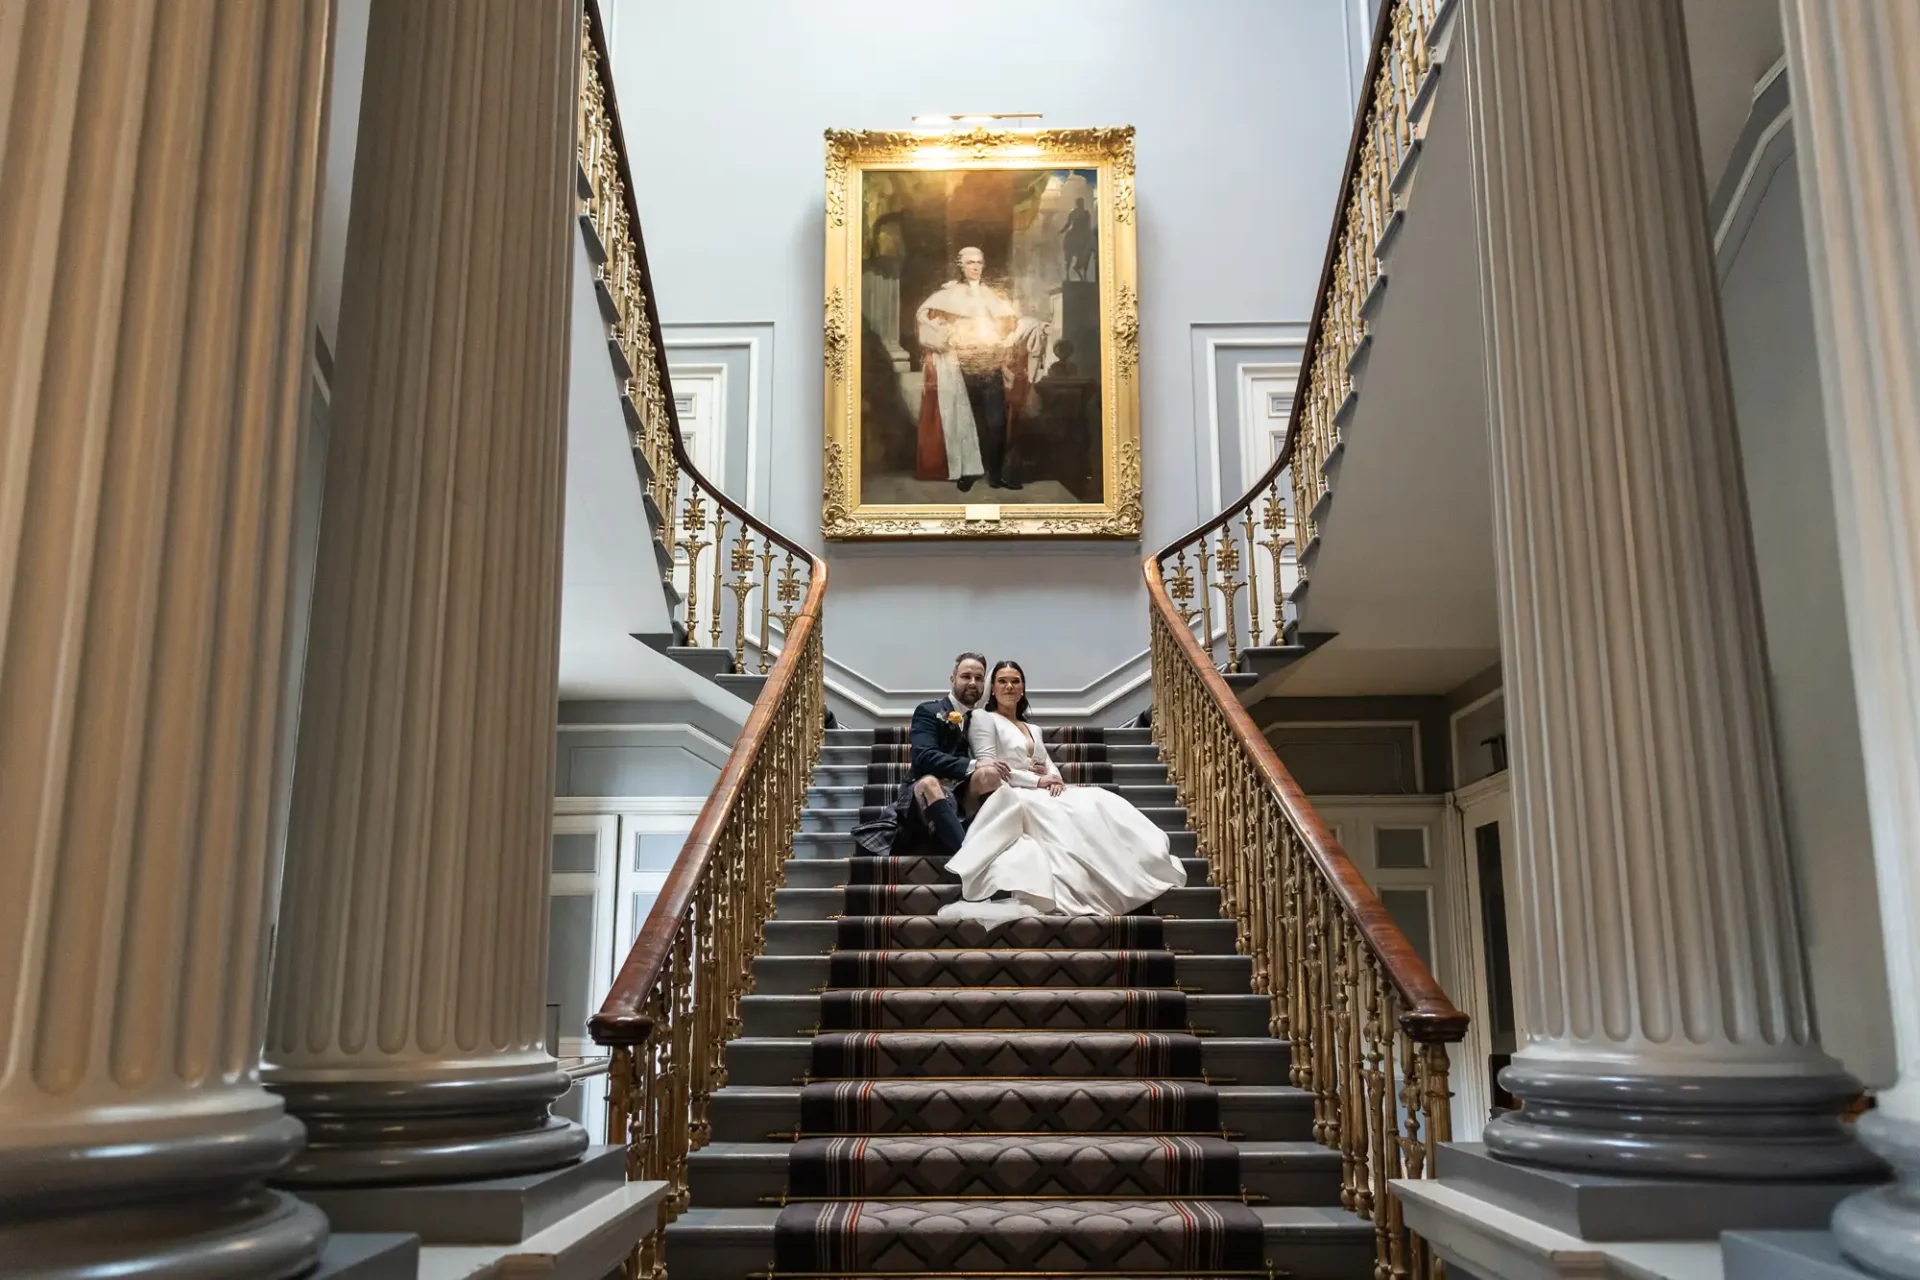 A bride and groom pose on an elegant staircase underneath a large portrait in a grand hall.